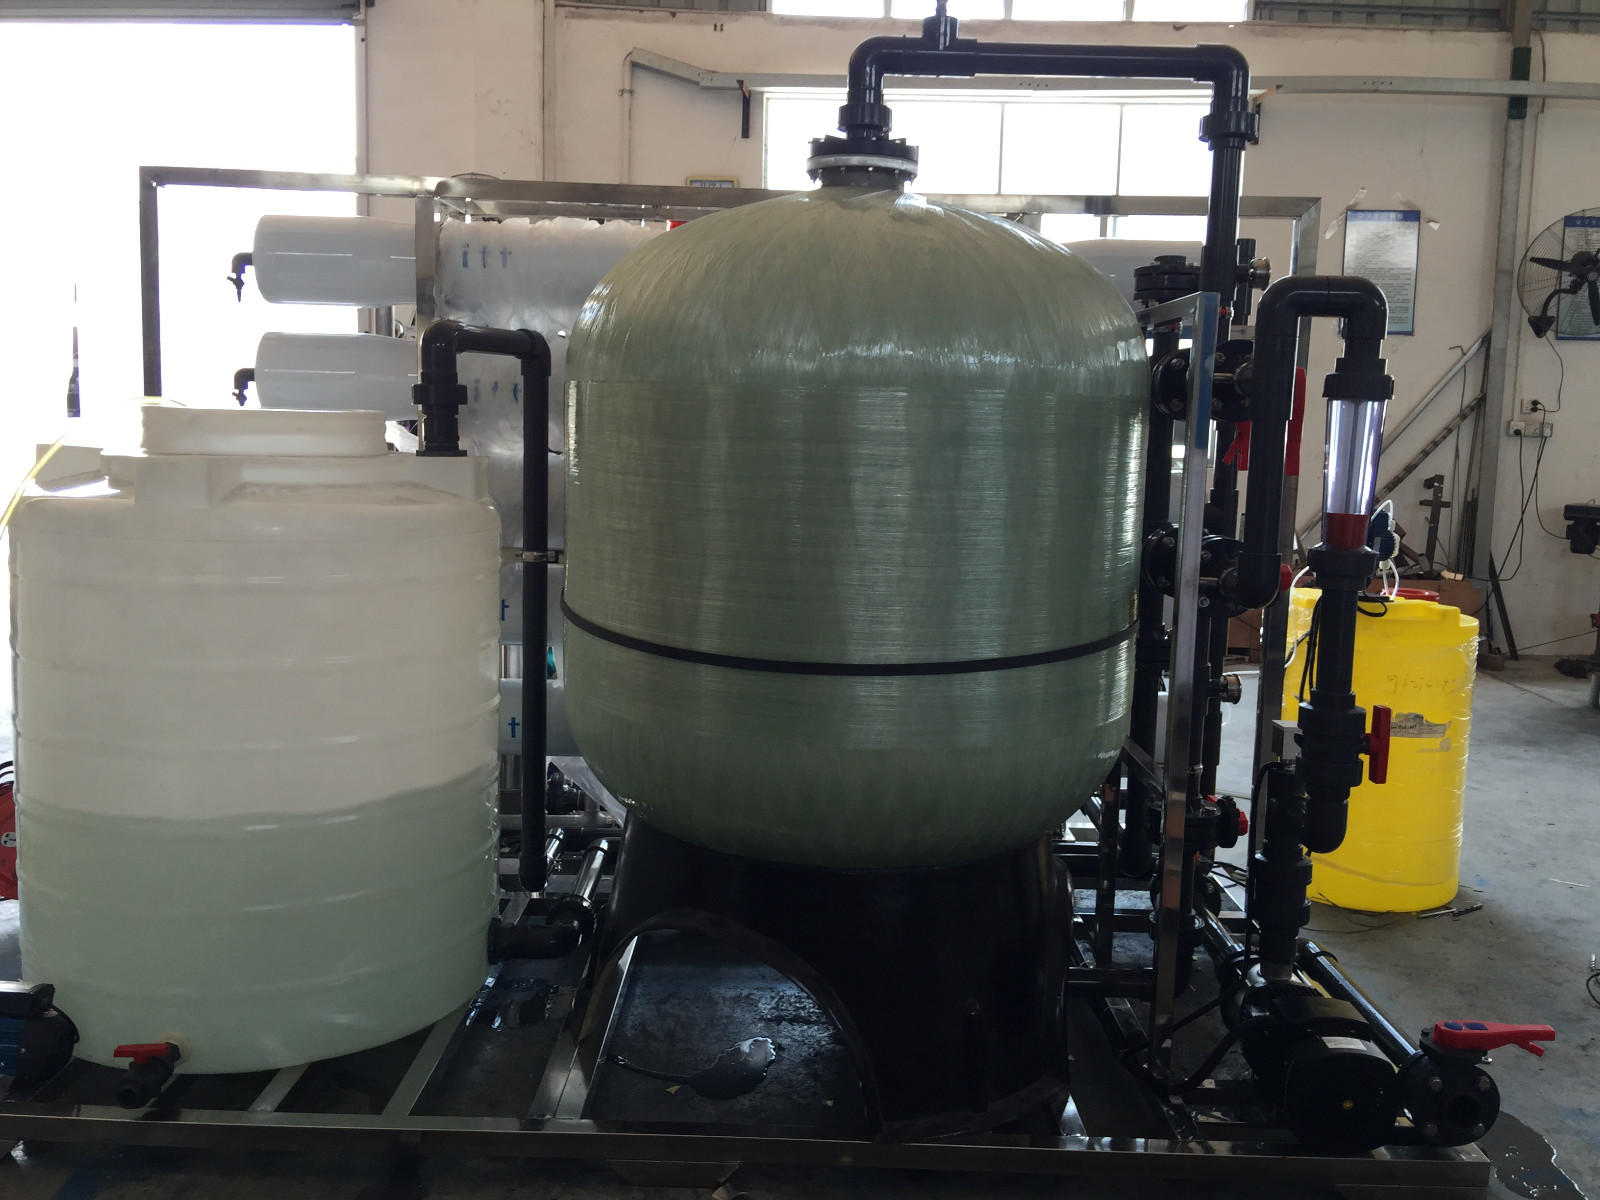 Ocpuritech water treatment companies personalized for food industry